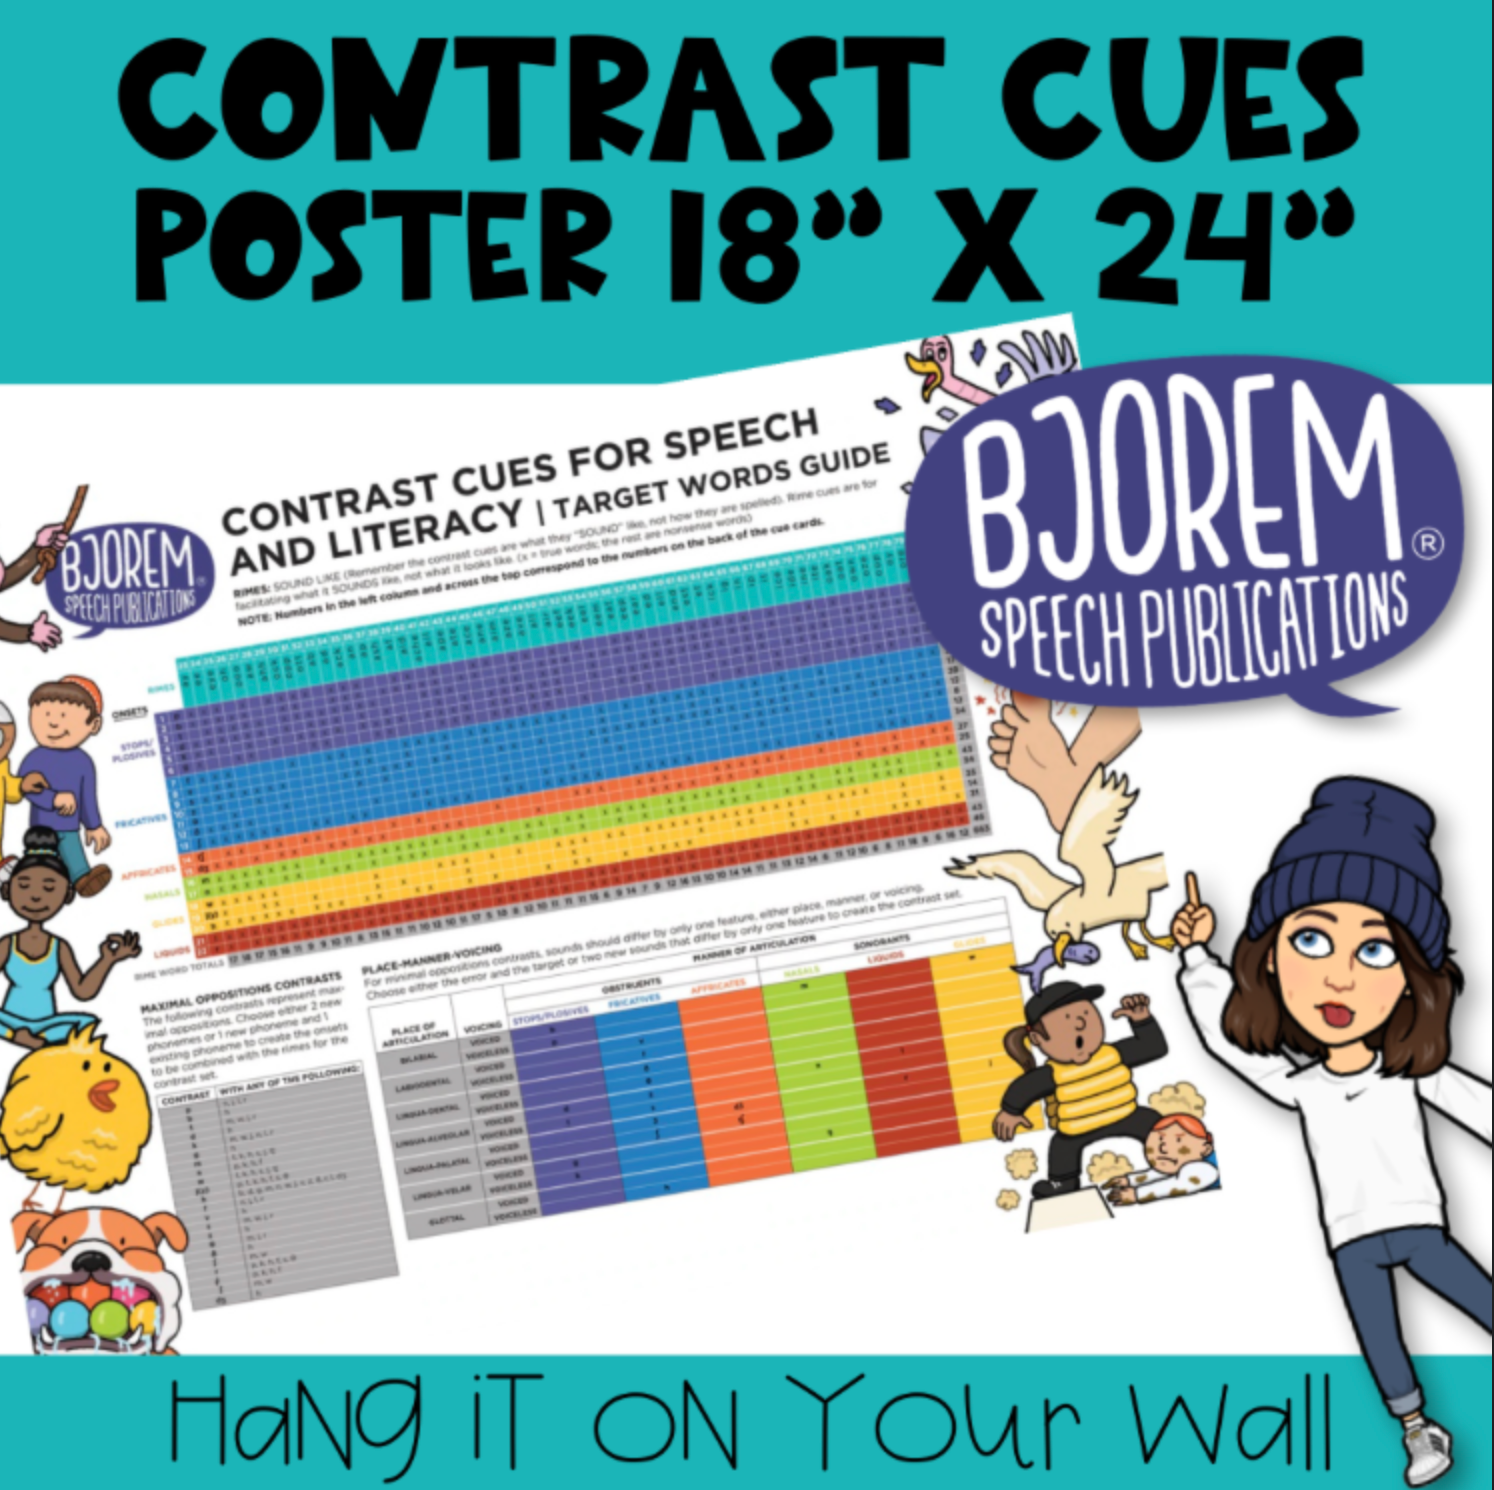 [title]Contrast Cues for Speech & Literacy POSTER - Download